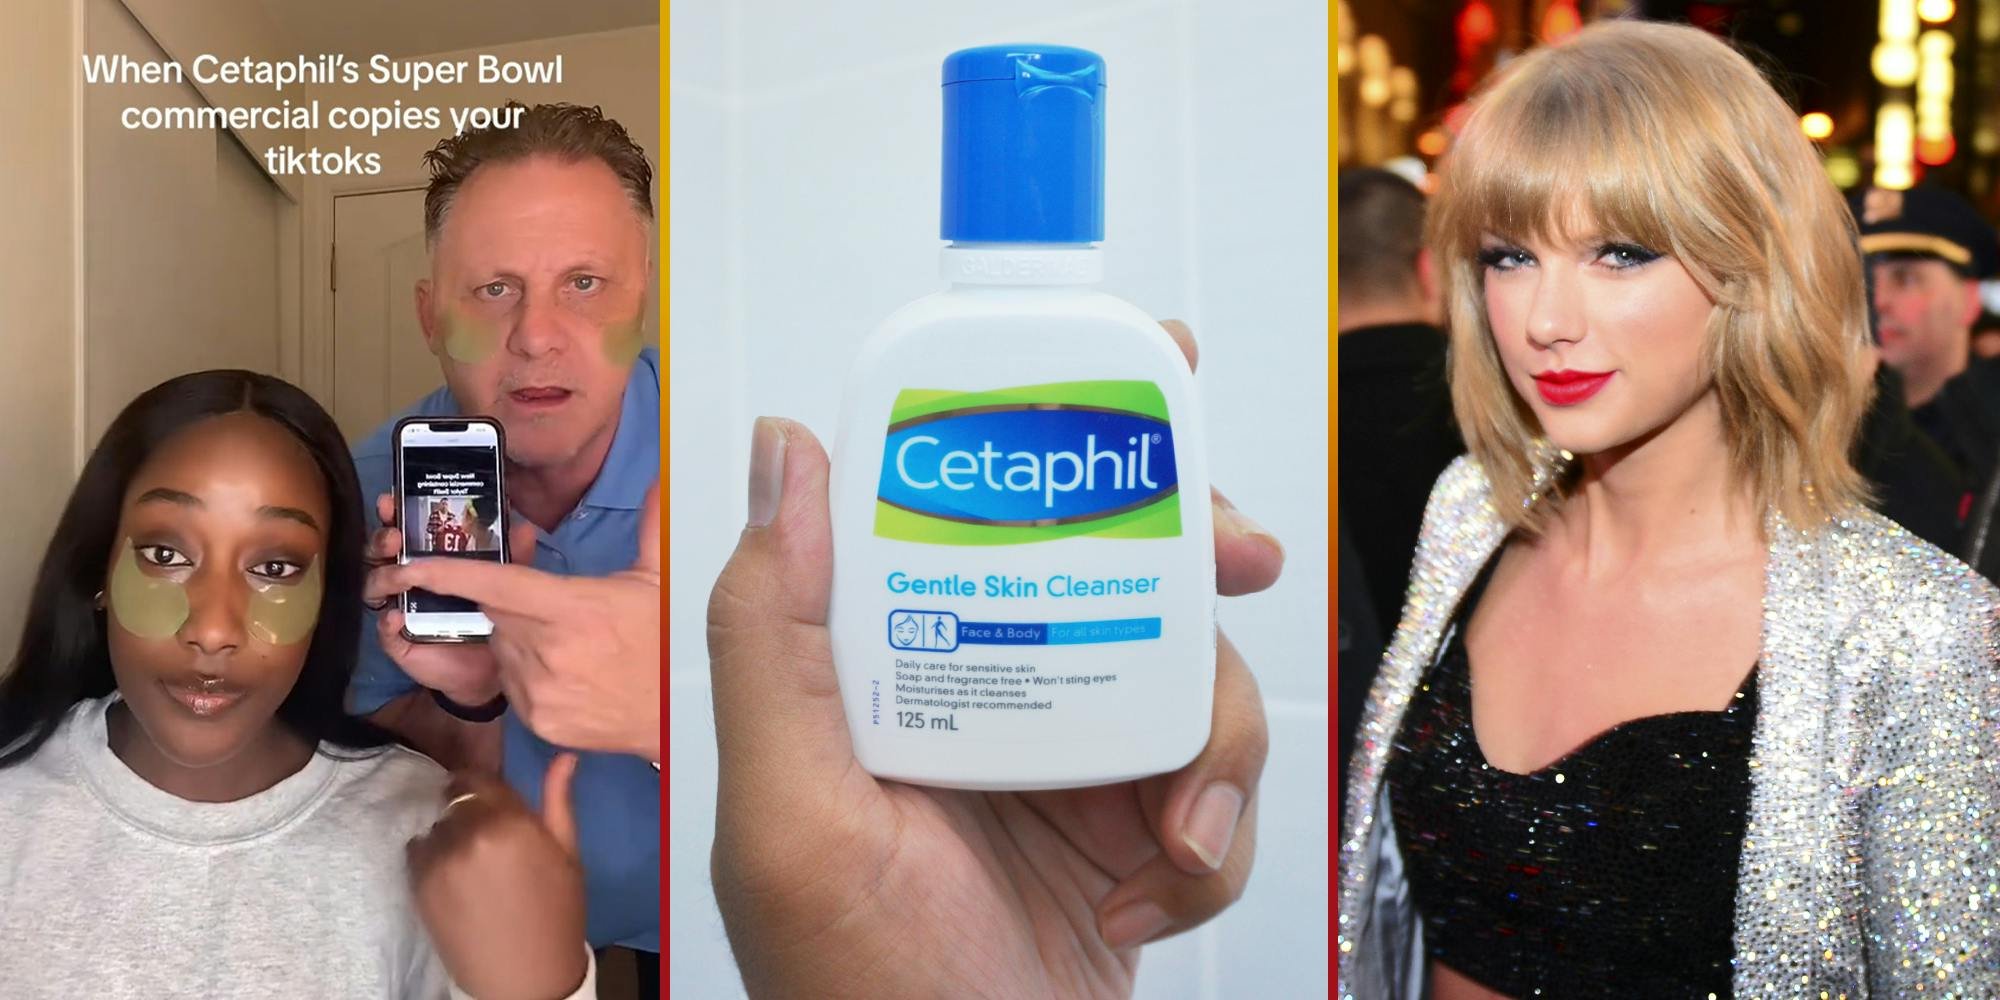 'It's our story': Father-daughter TikTok duo says Cetaphil stole one of their videos for its Taylor Swift-inspired Super Bowl ad